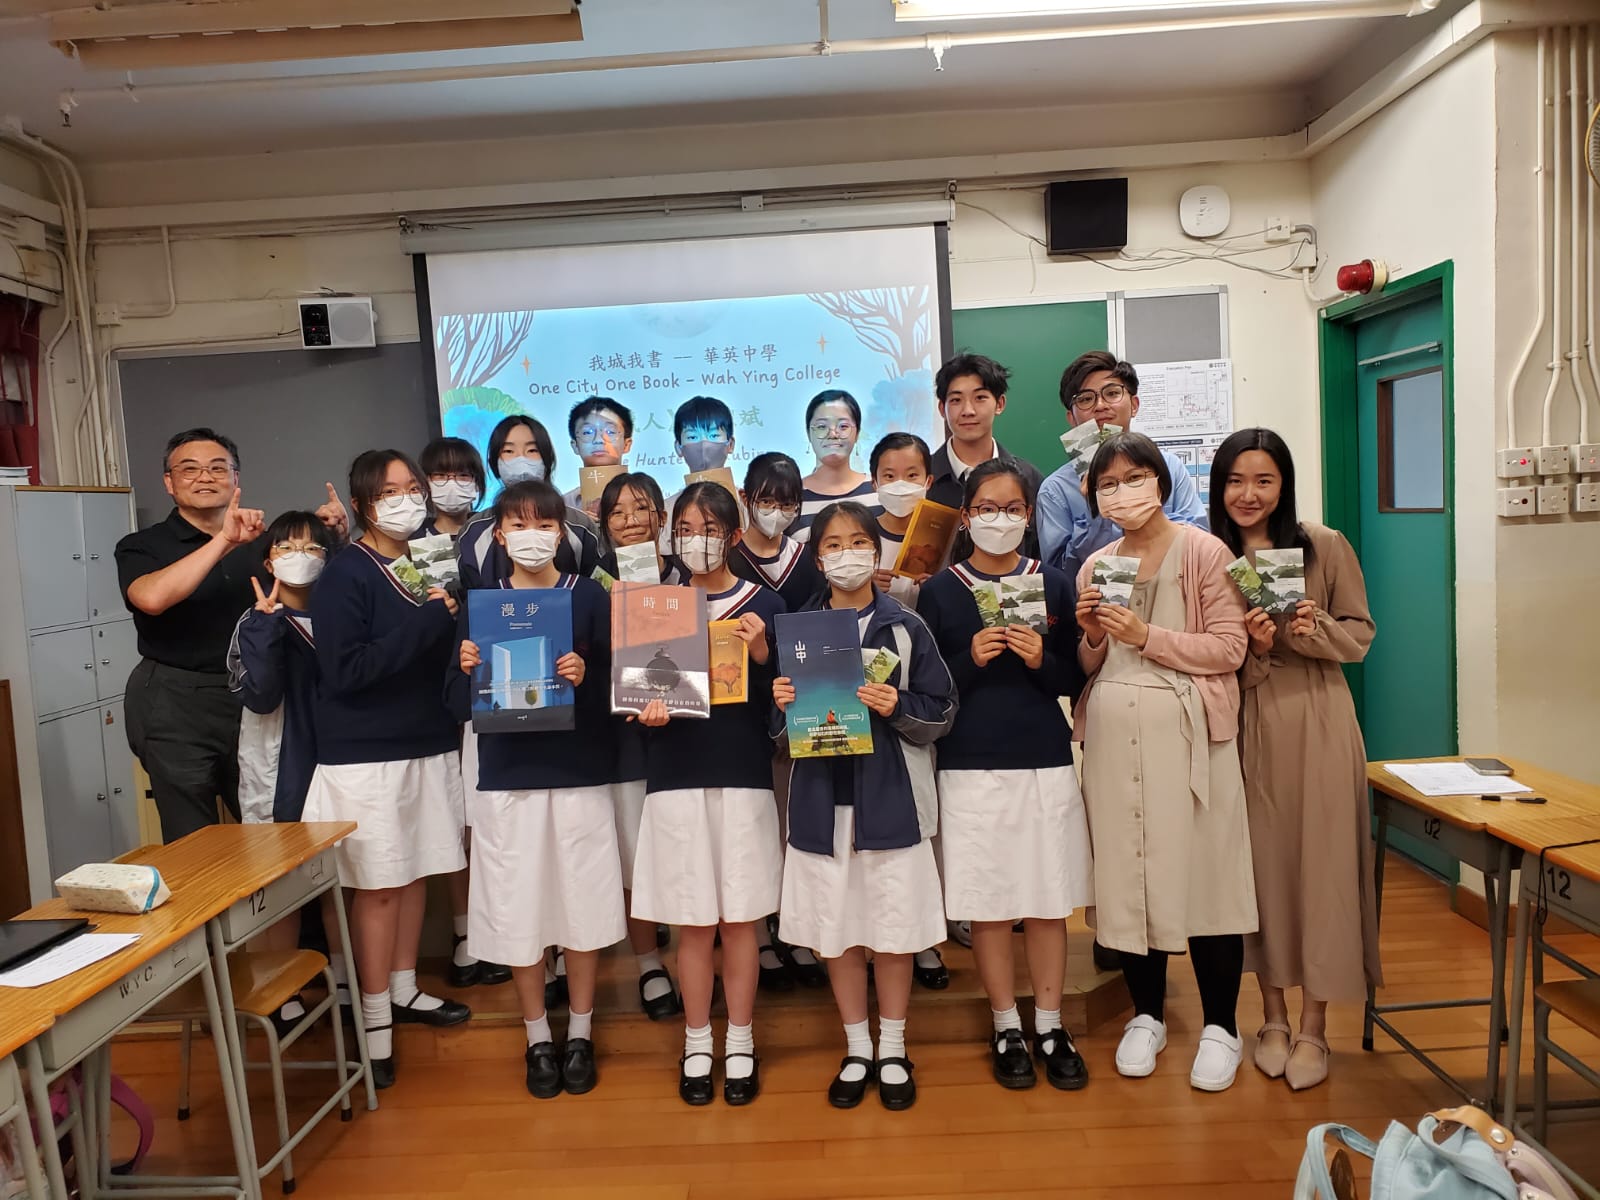 School reading event in Wa Ying College